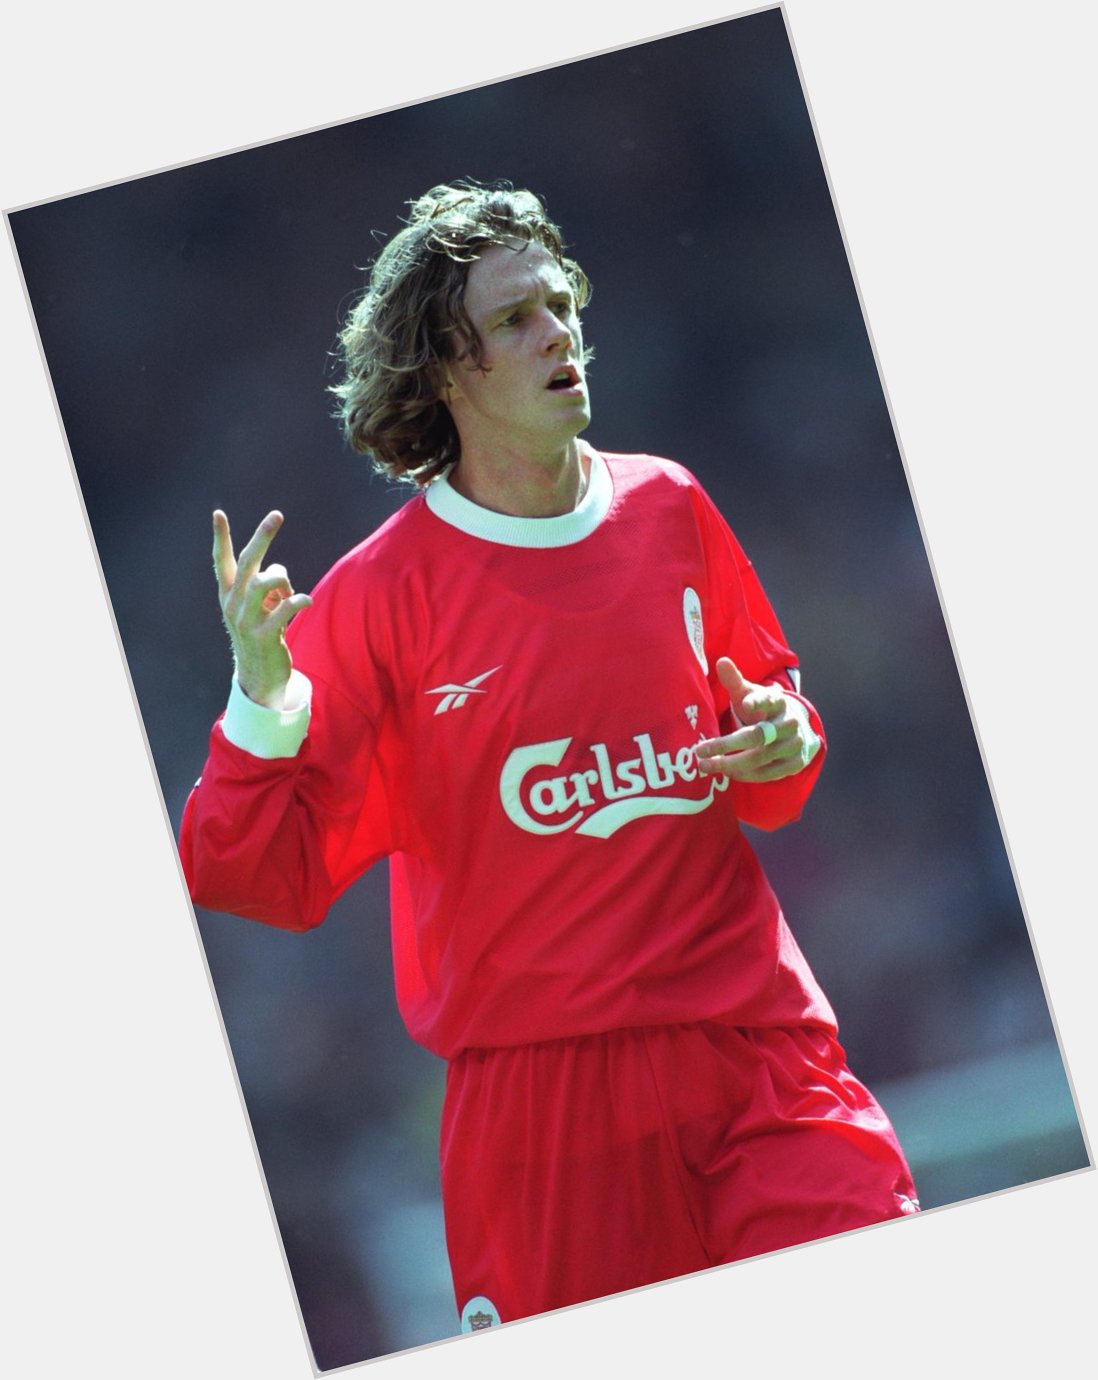  Happy Birthday Steve McManaman former Real Madrid, Liverpool and England midfielder - 4  9  today 